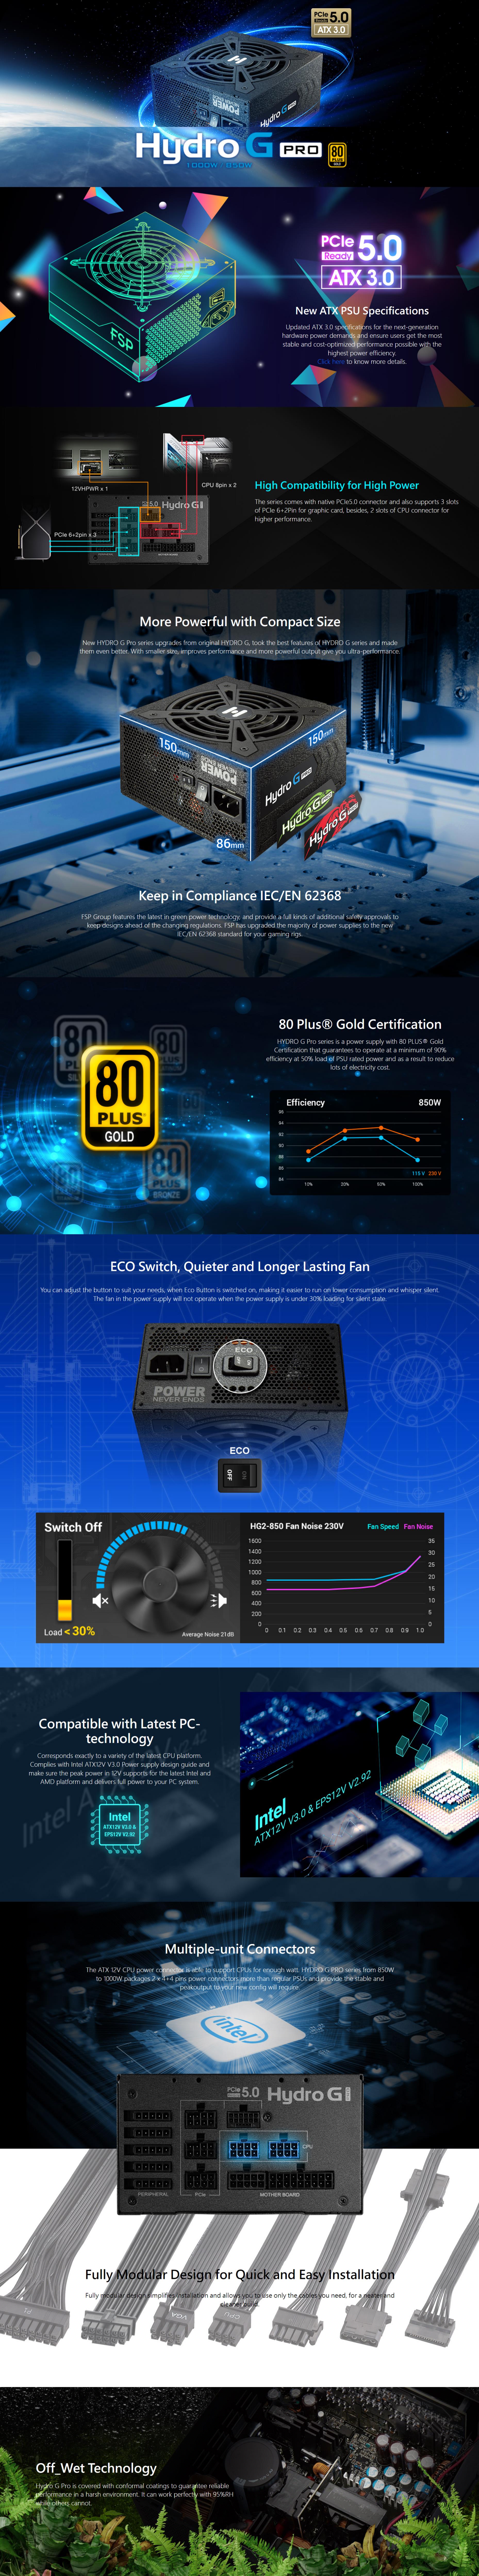 A large marketing image providing additional information about the product FSP Hydro G PRO 850W Gold PCIe 5.0 ATX Modular PSU - Additional alt info not provided